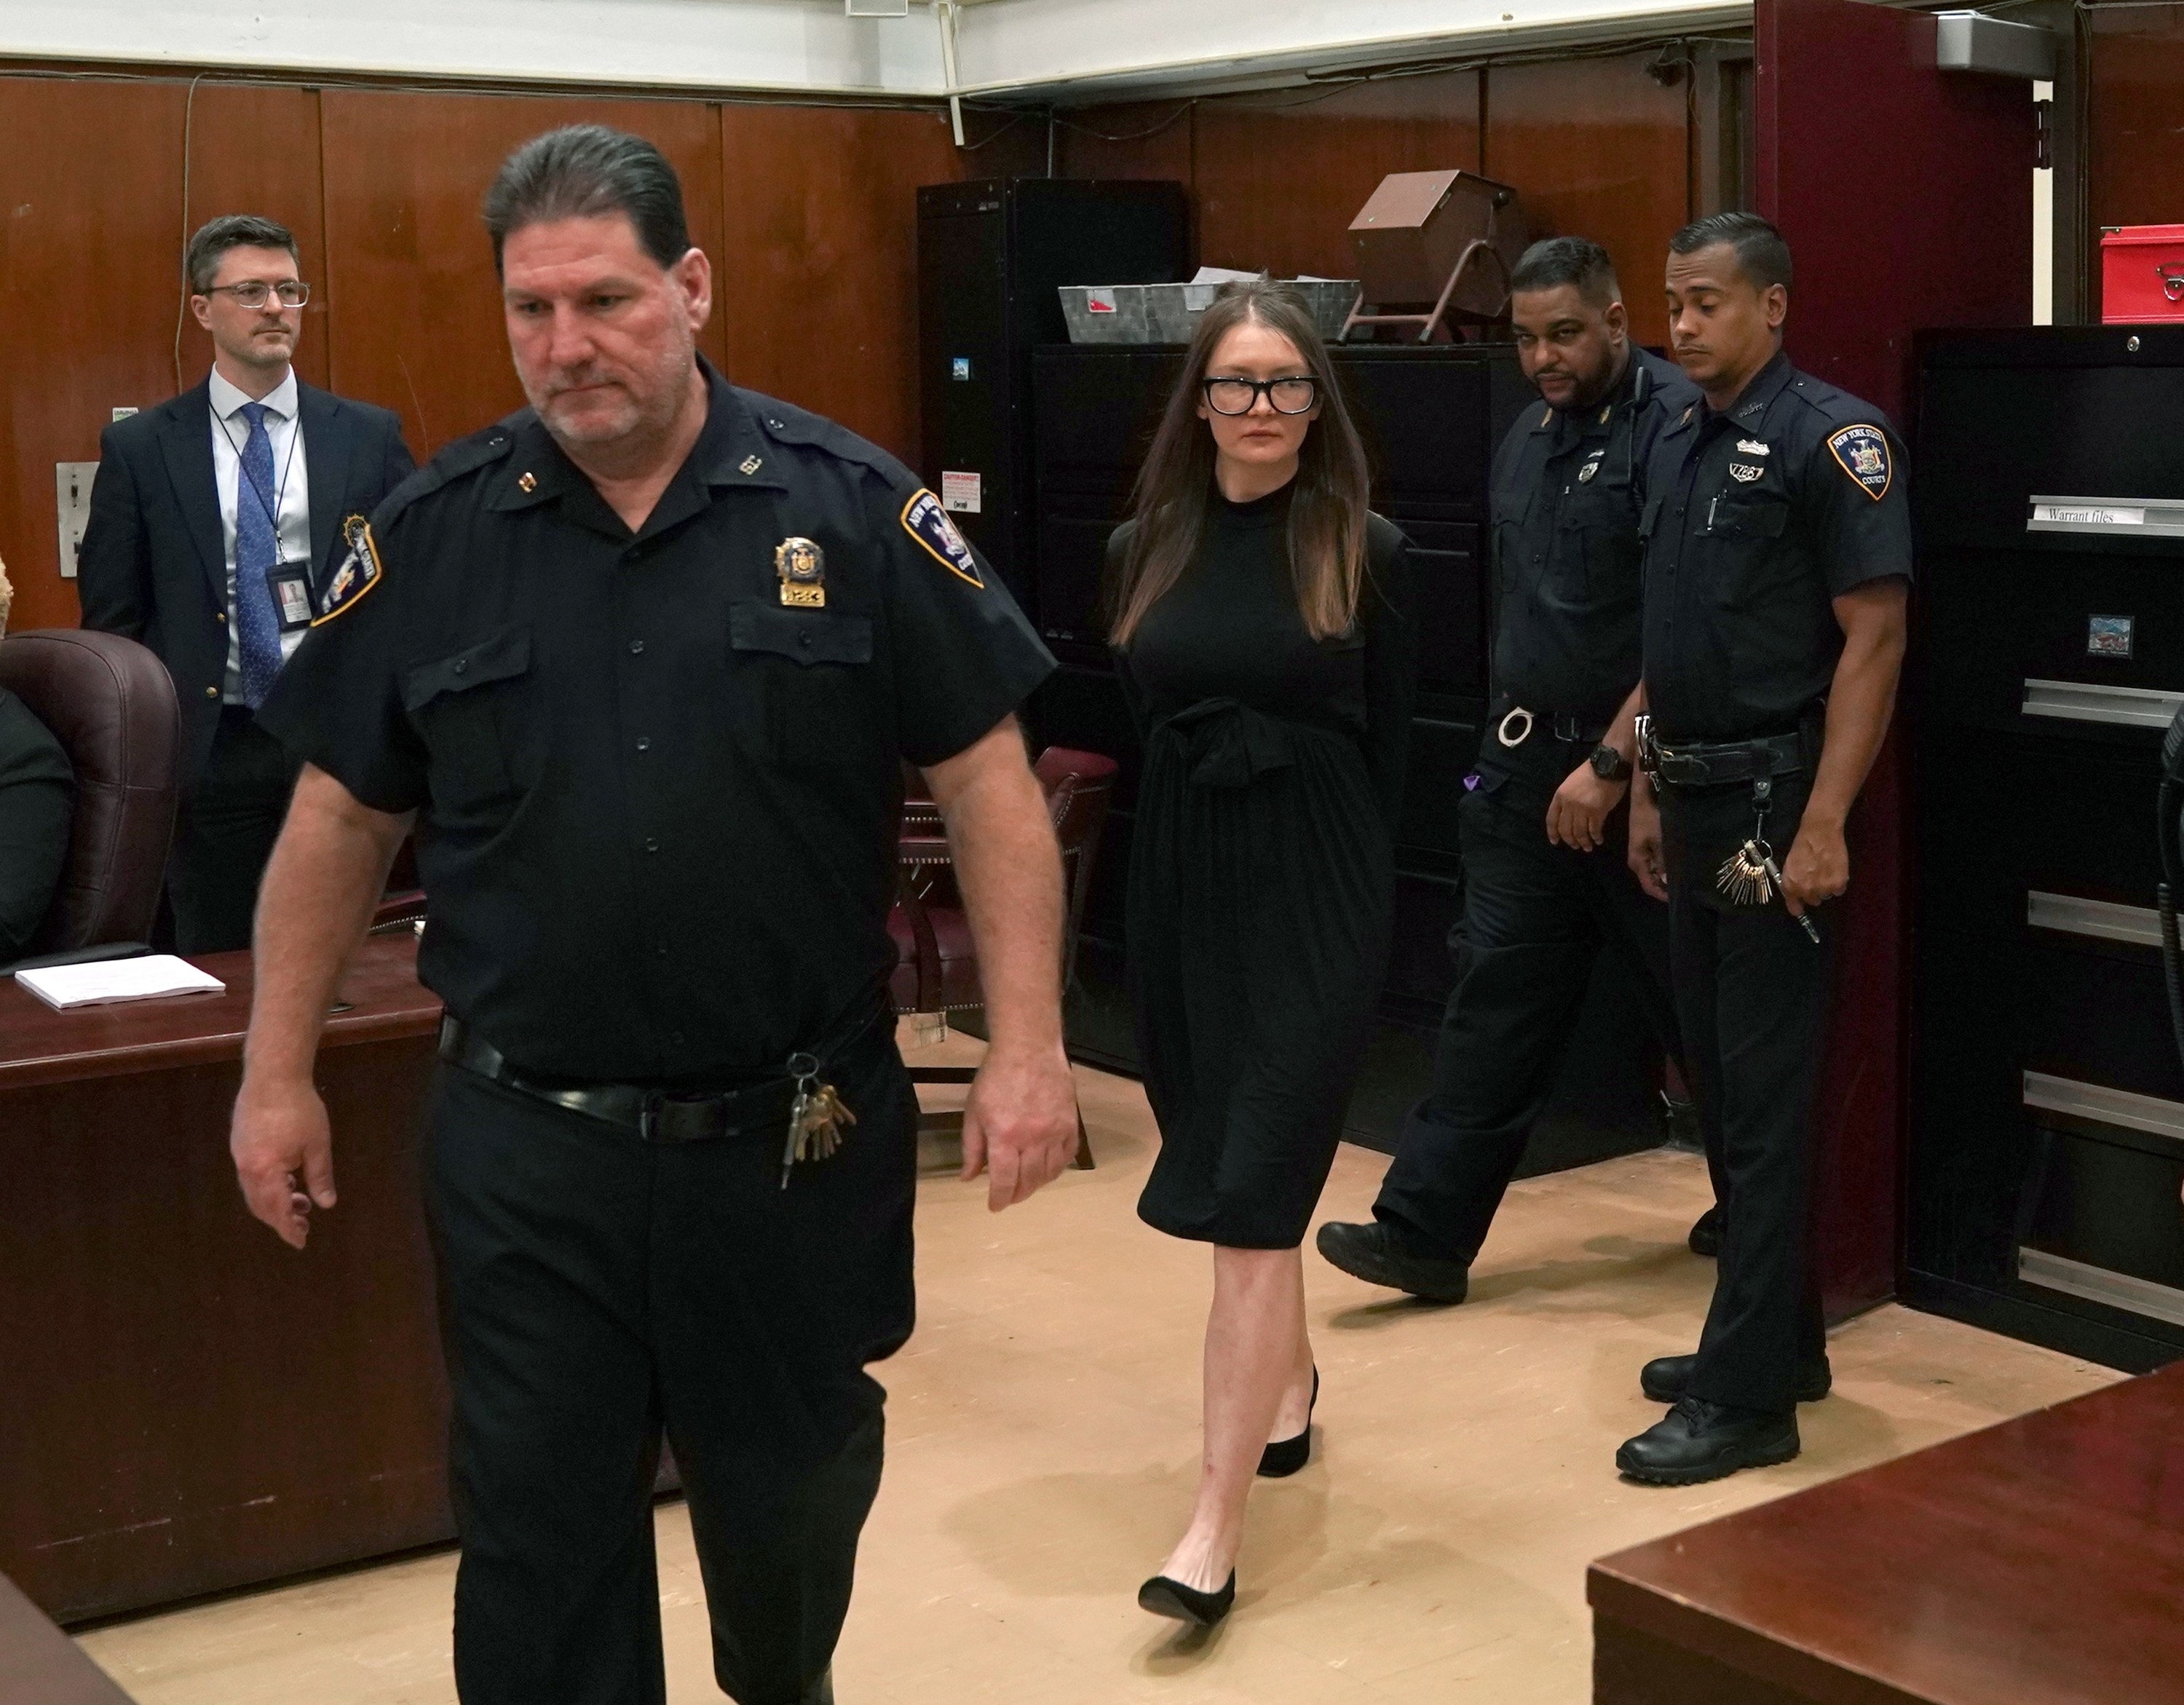 Anna being escorted into the court